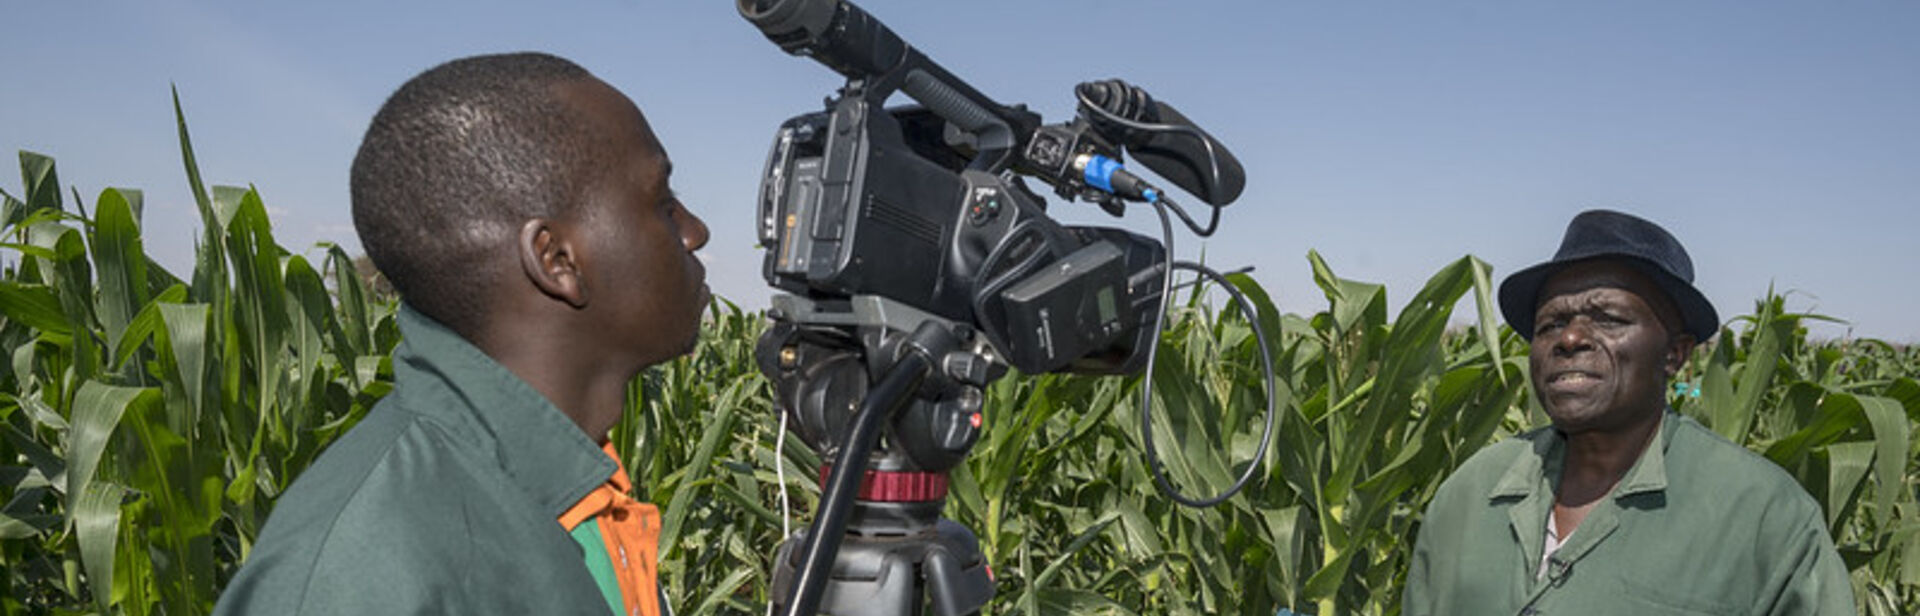 Journalist interviews a man while standing in a cornfield